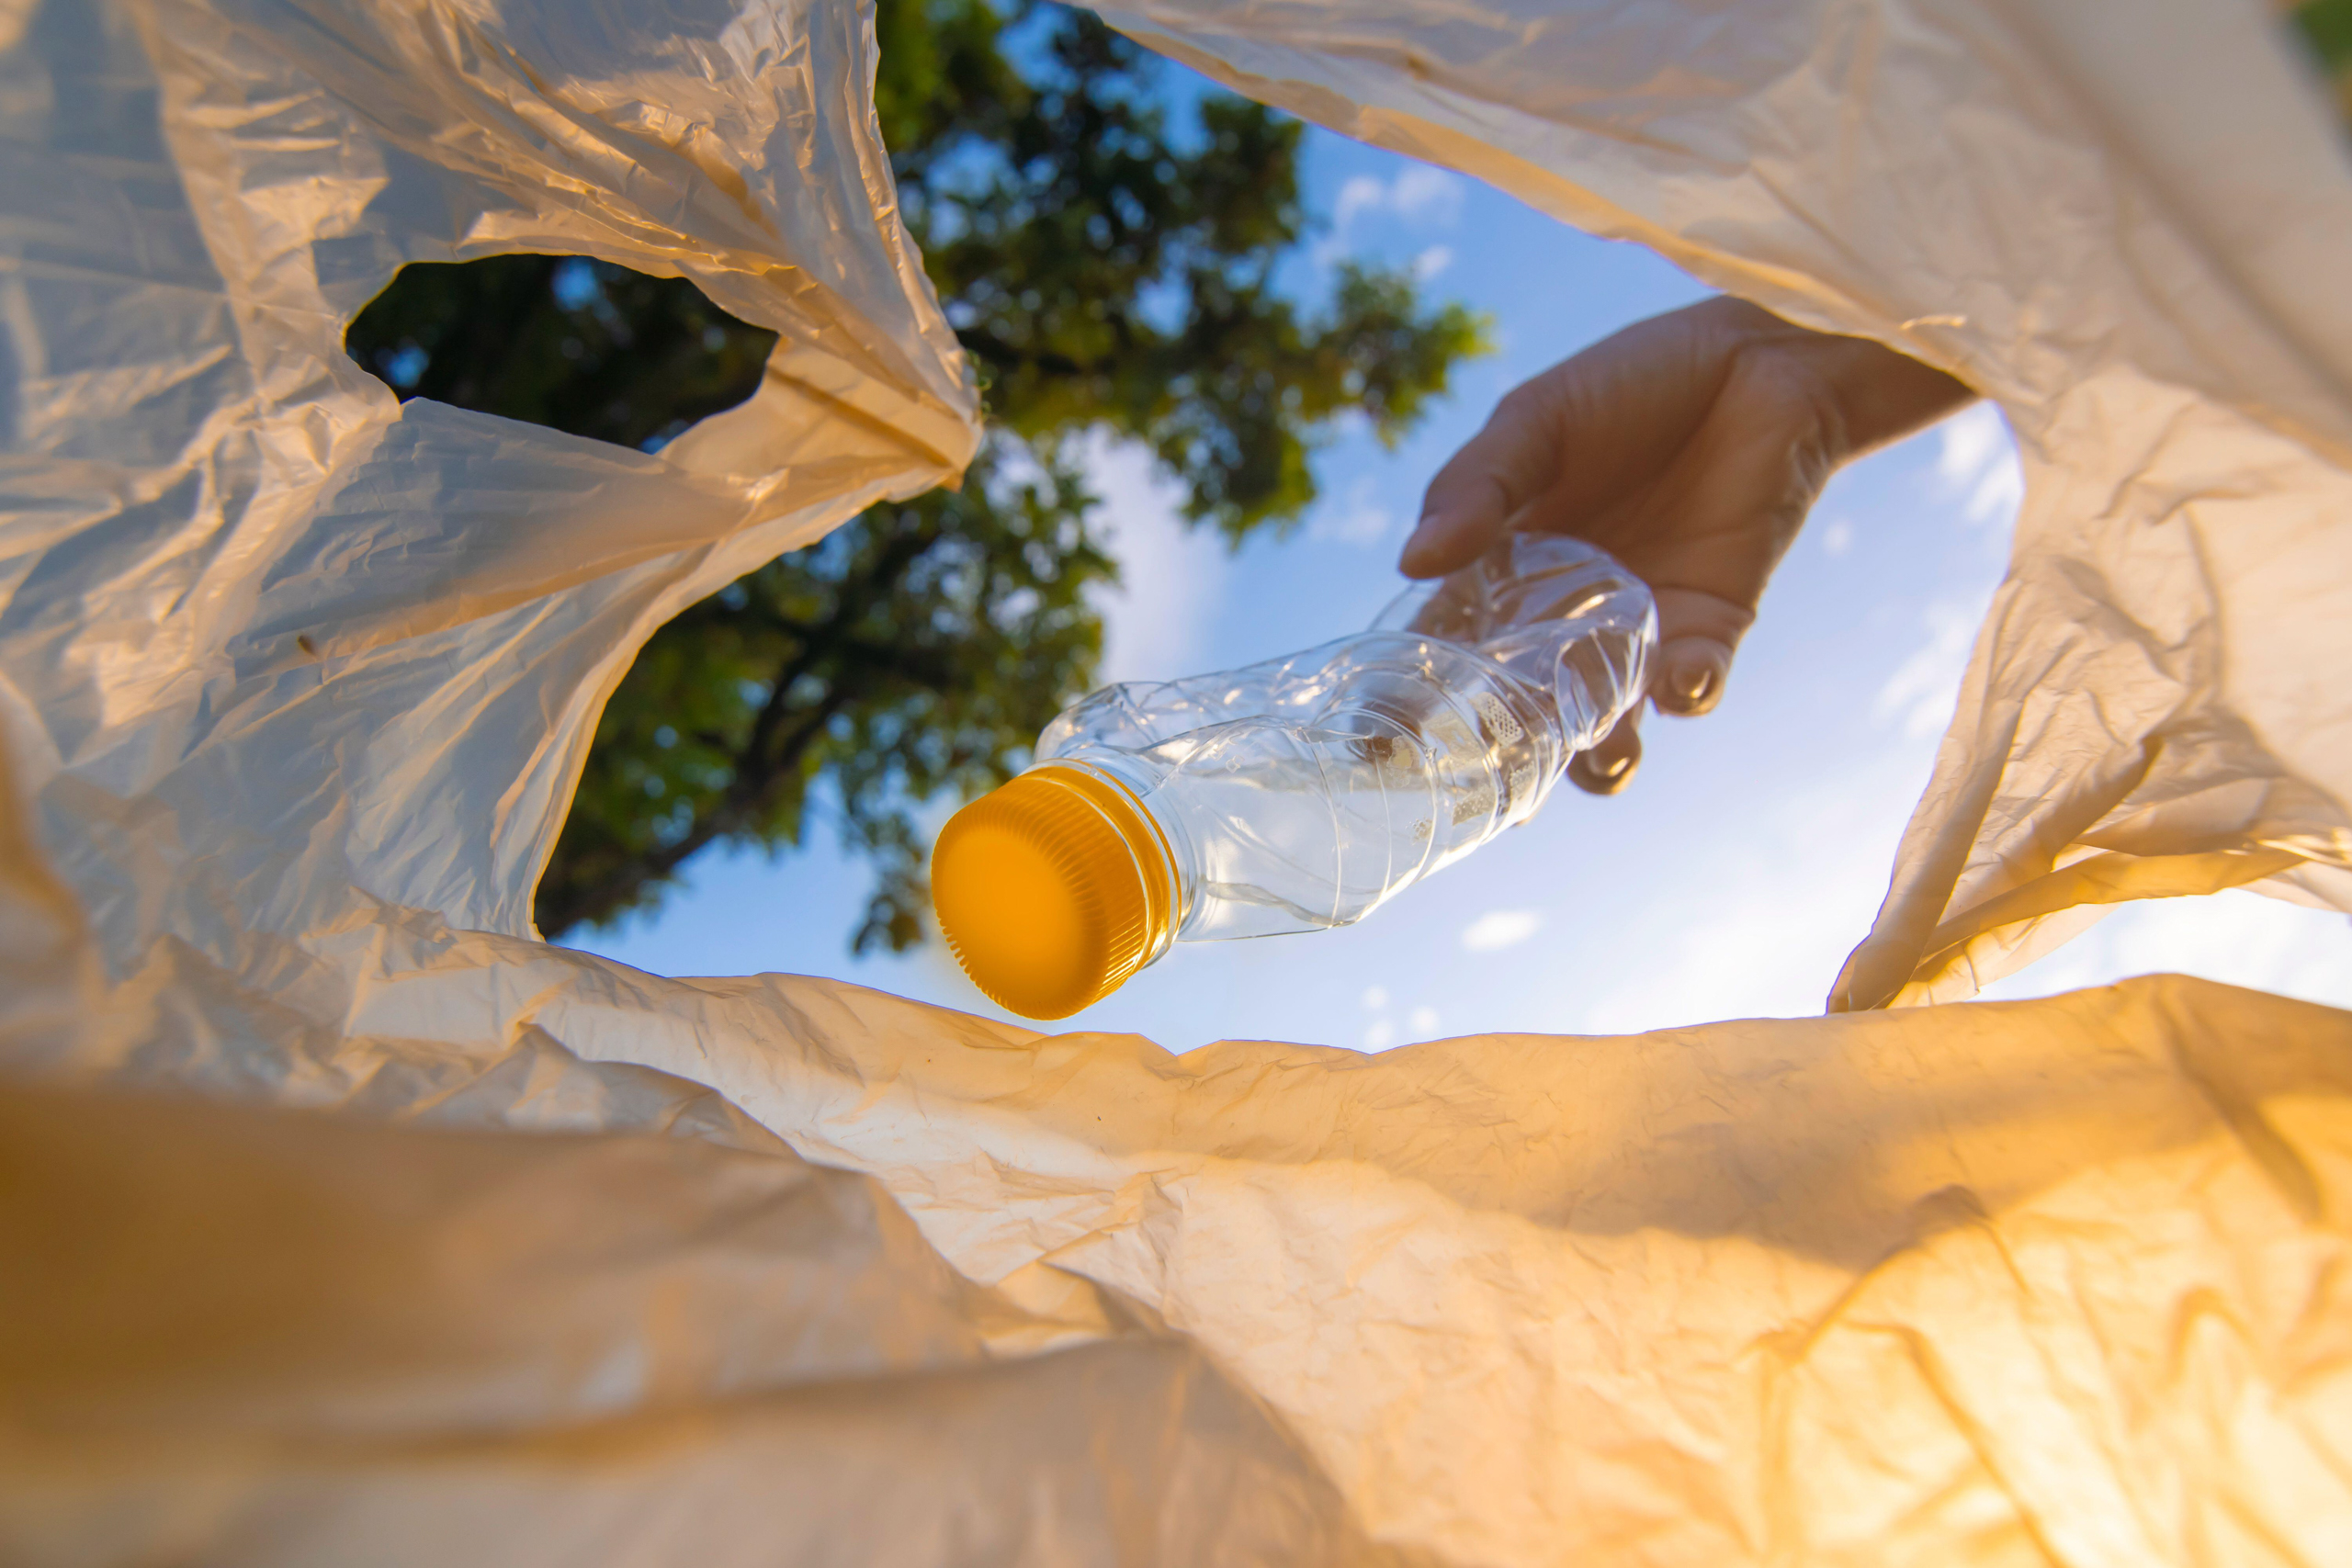 <p>A volunteer removes plastic waste from a public park. A global agreement to limit plastic pollution is meant to be completed this year. (Image: Alamy)</p>